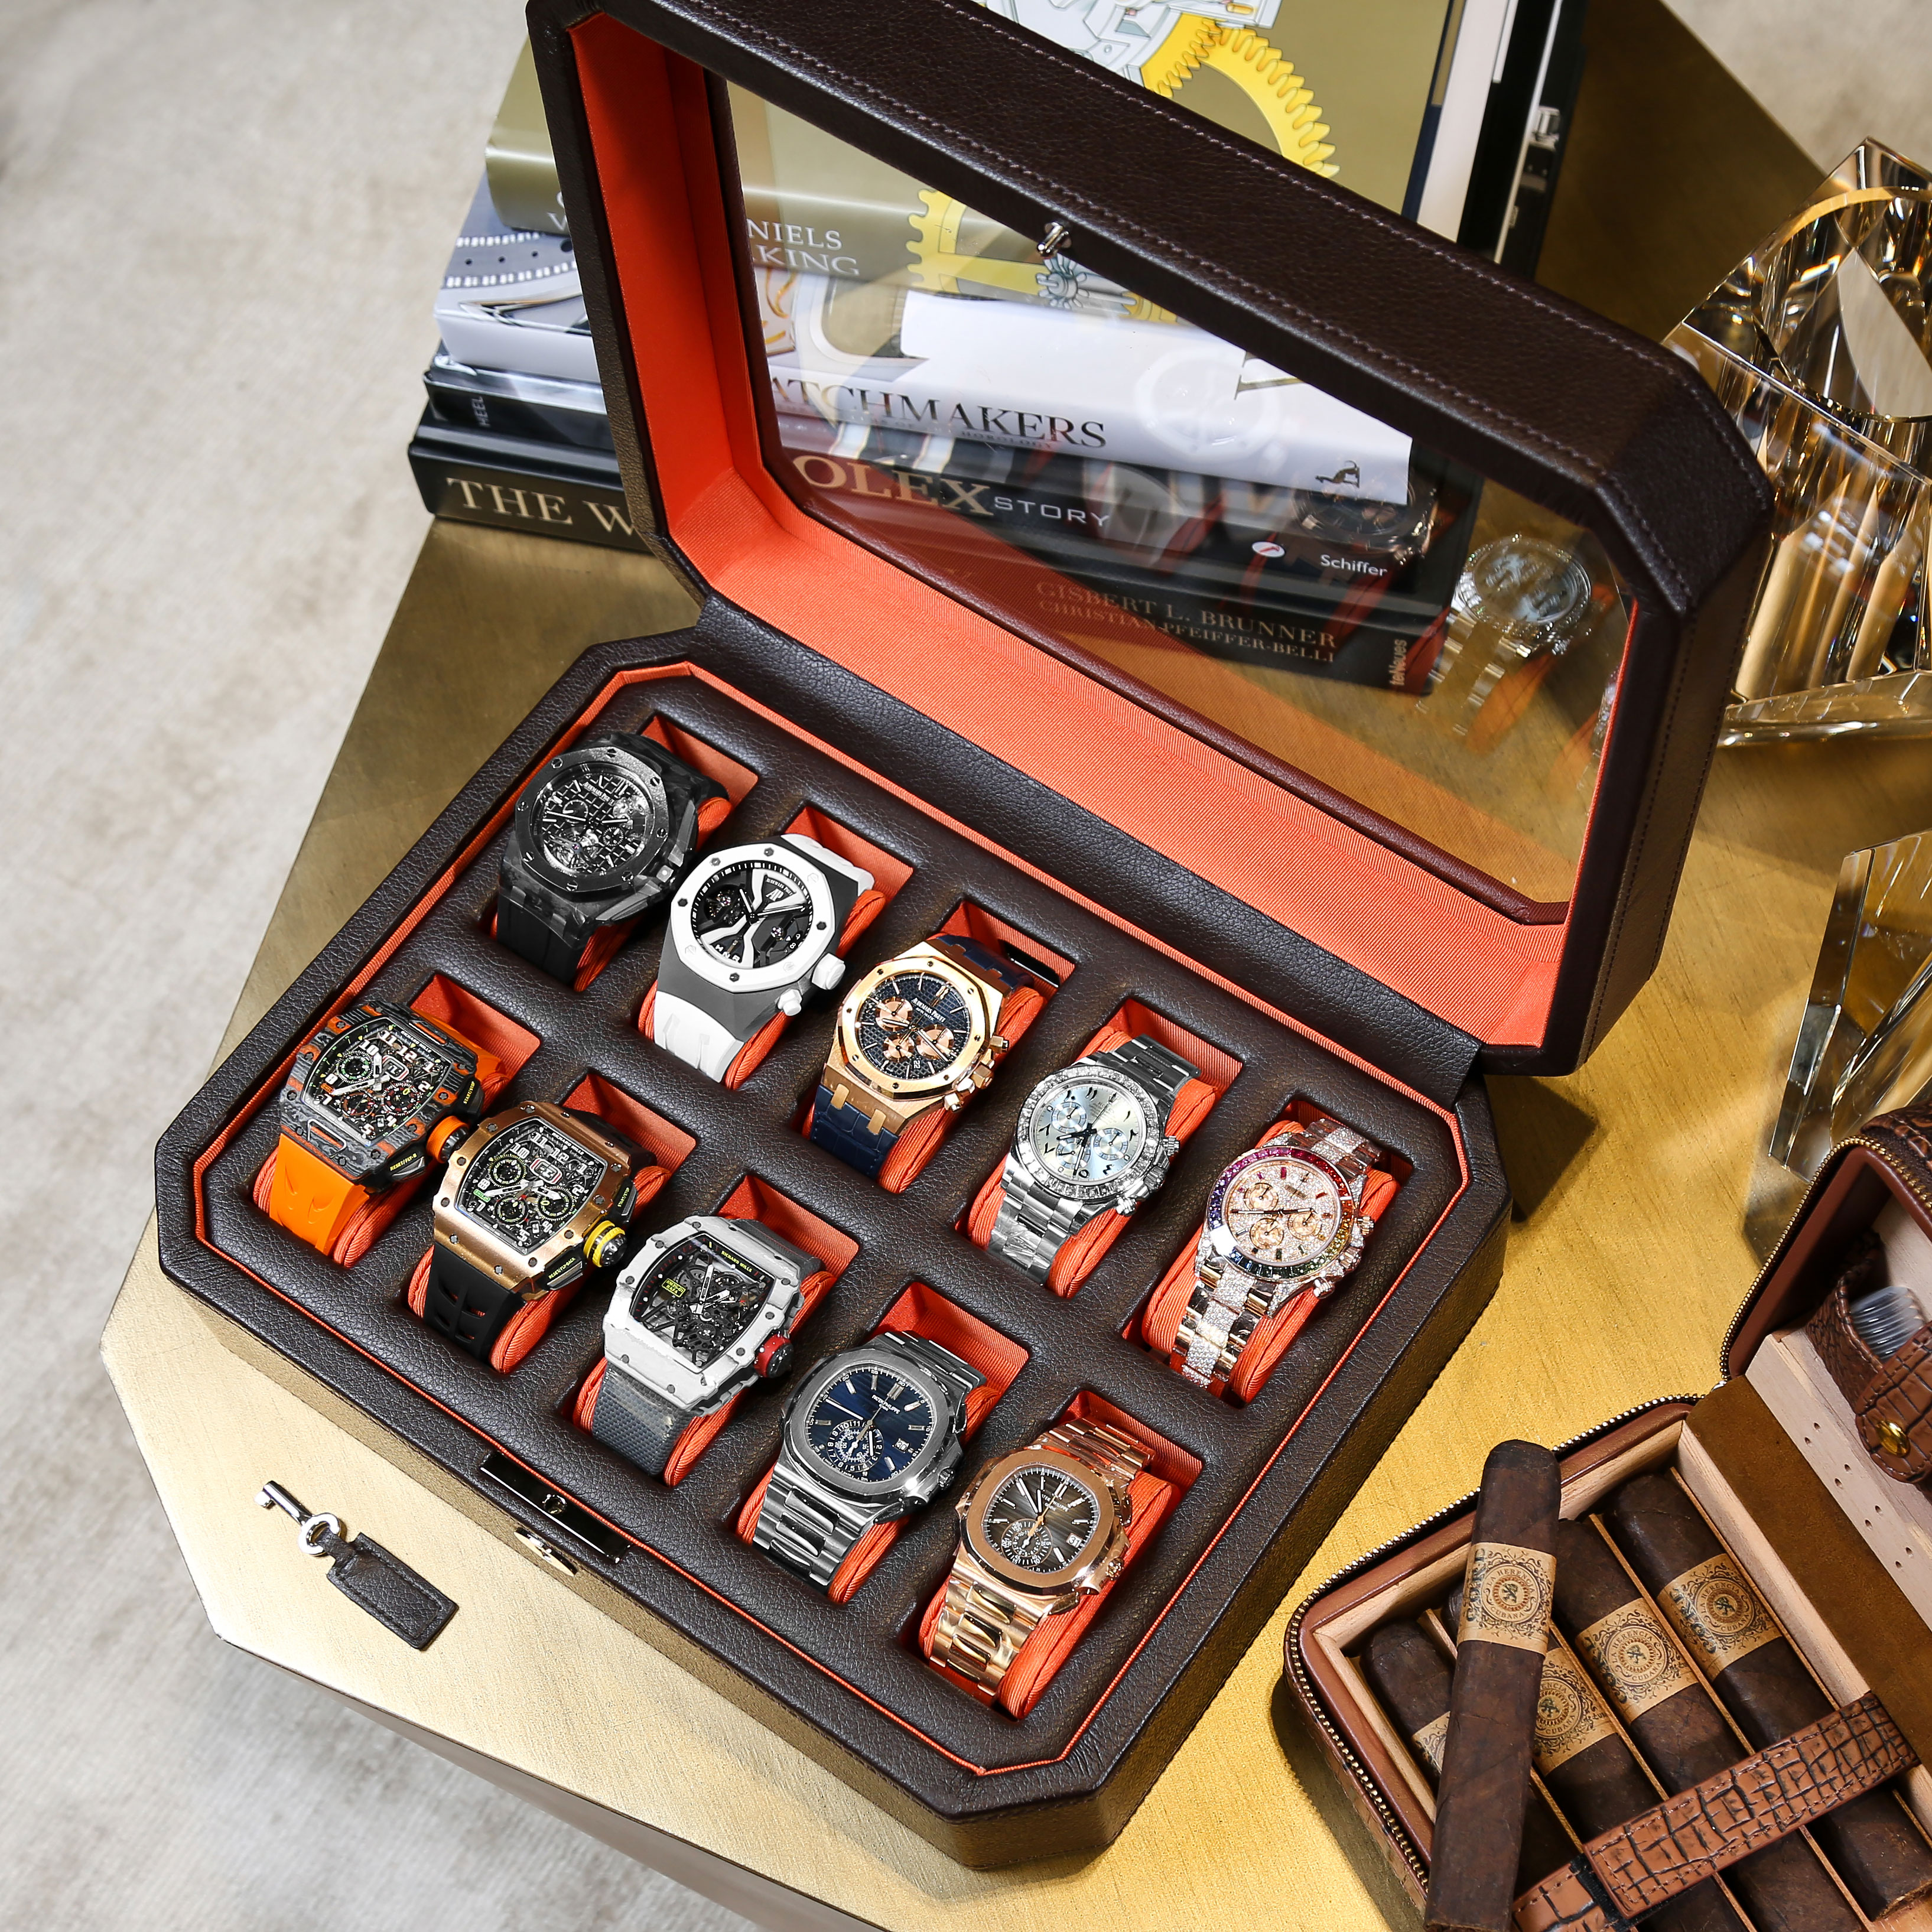 Black Leather Watch Box Filled with Ten Luxury Timepieces that Include Rolex, Audemars Piguet, Patek Philippe, and Richard Mille, Sitting on a Tabletop Beside a Case of Cigars